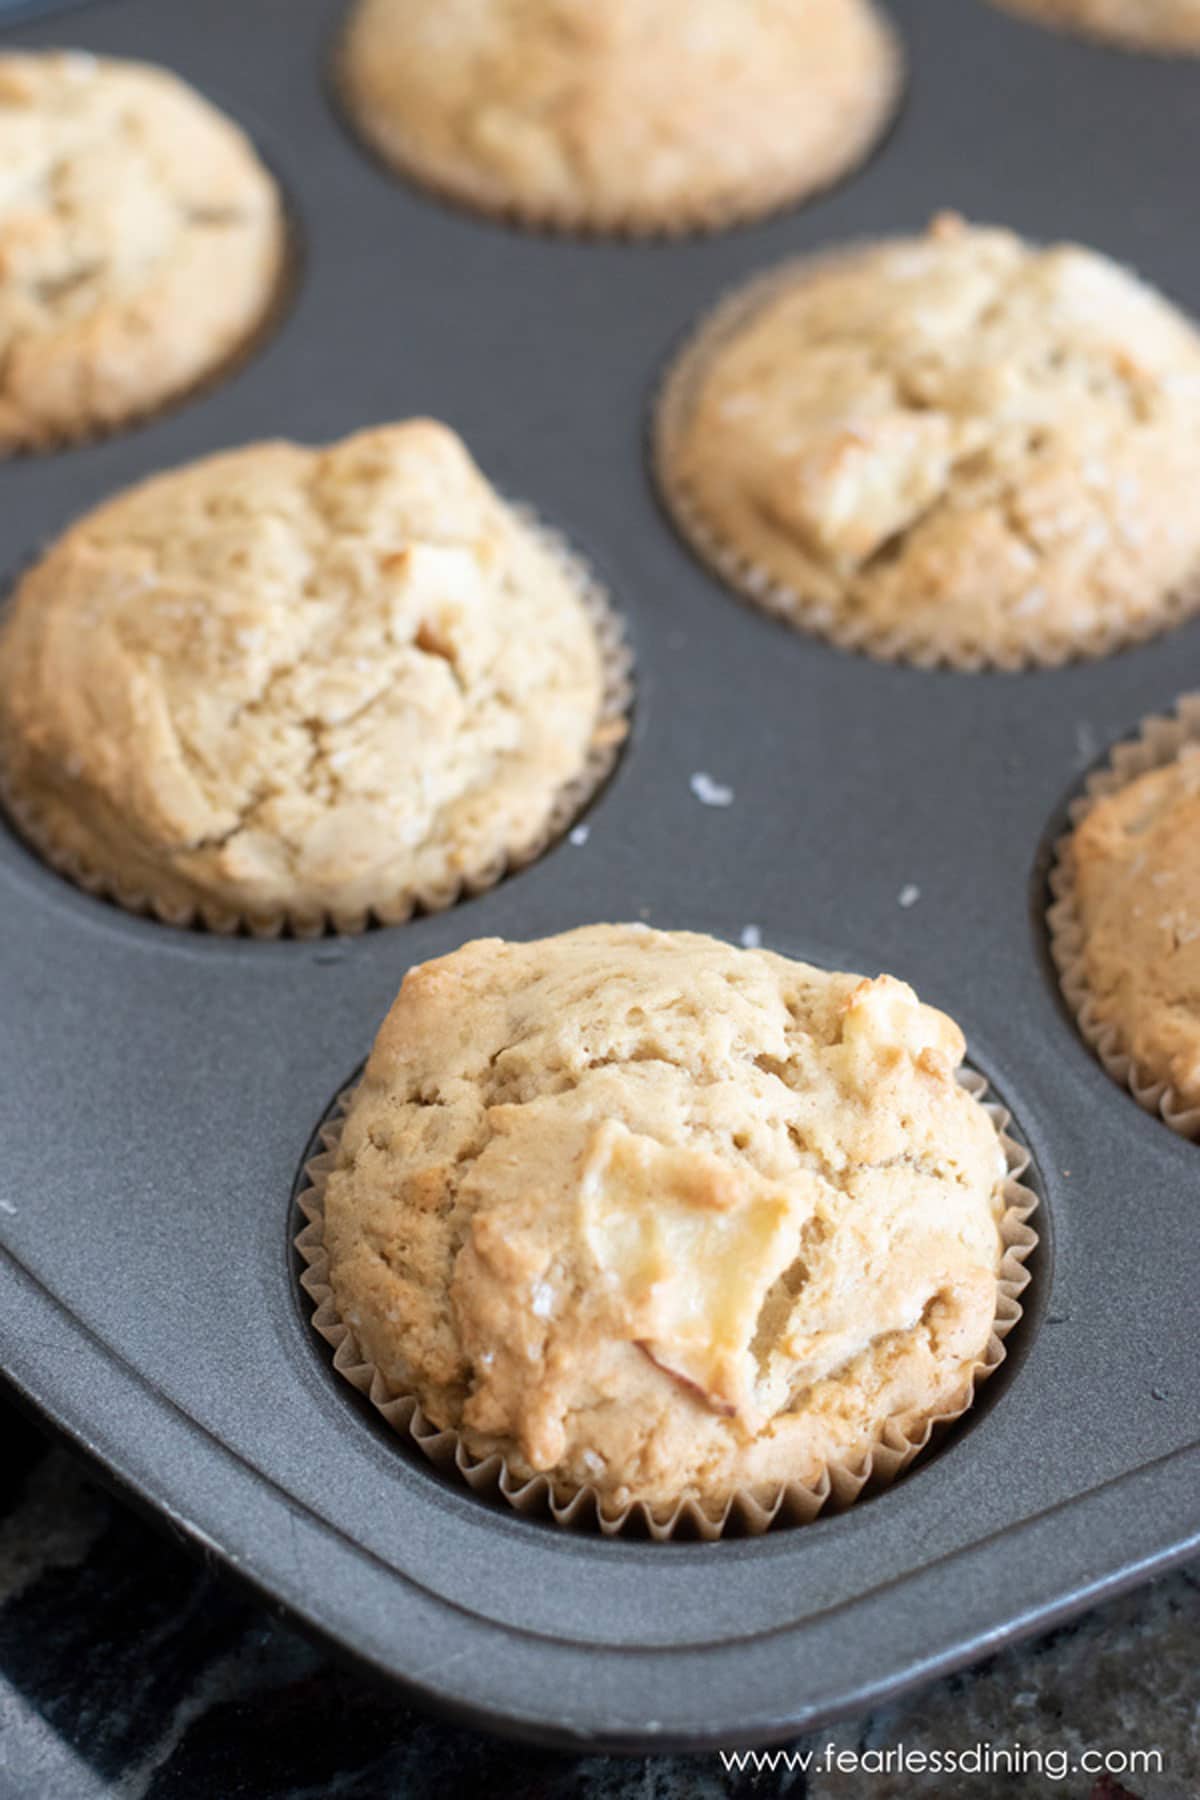 A muffin tin full of baked apple muffins.